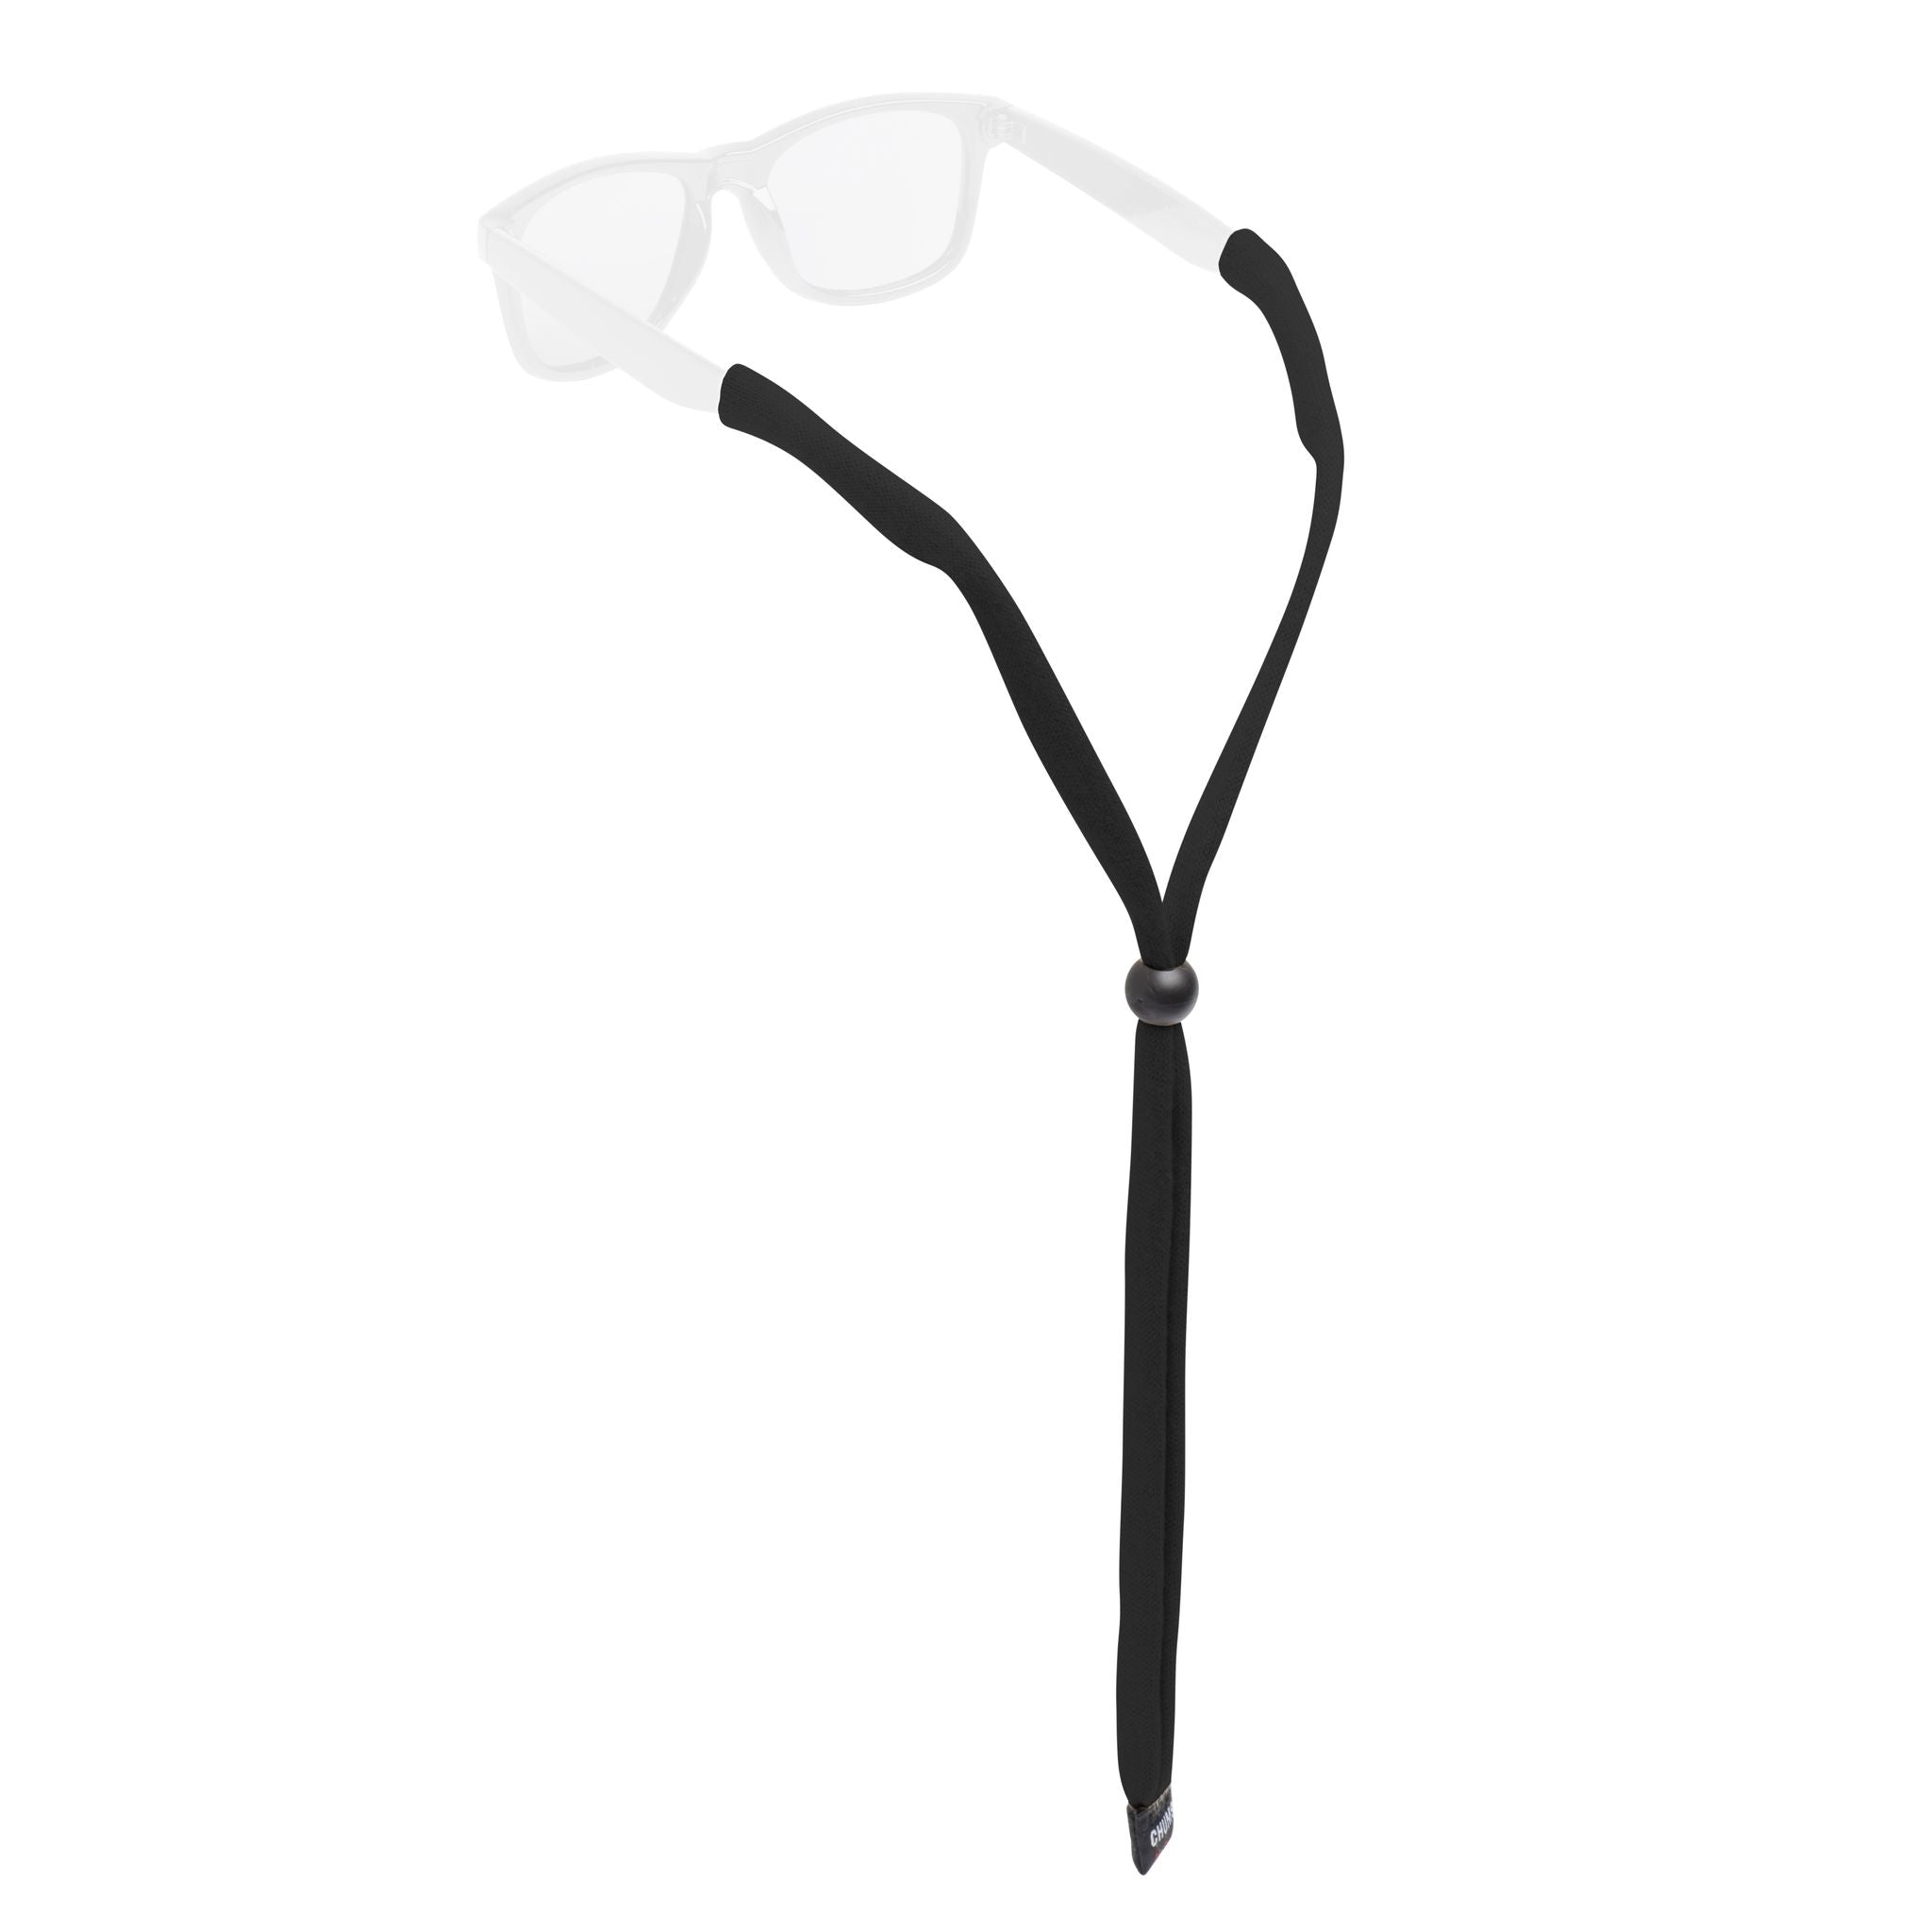 Eyeglass strap Stay Puts Sunglass Strap Silicone Retainer 4 pack 